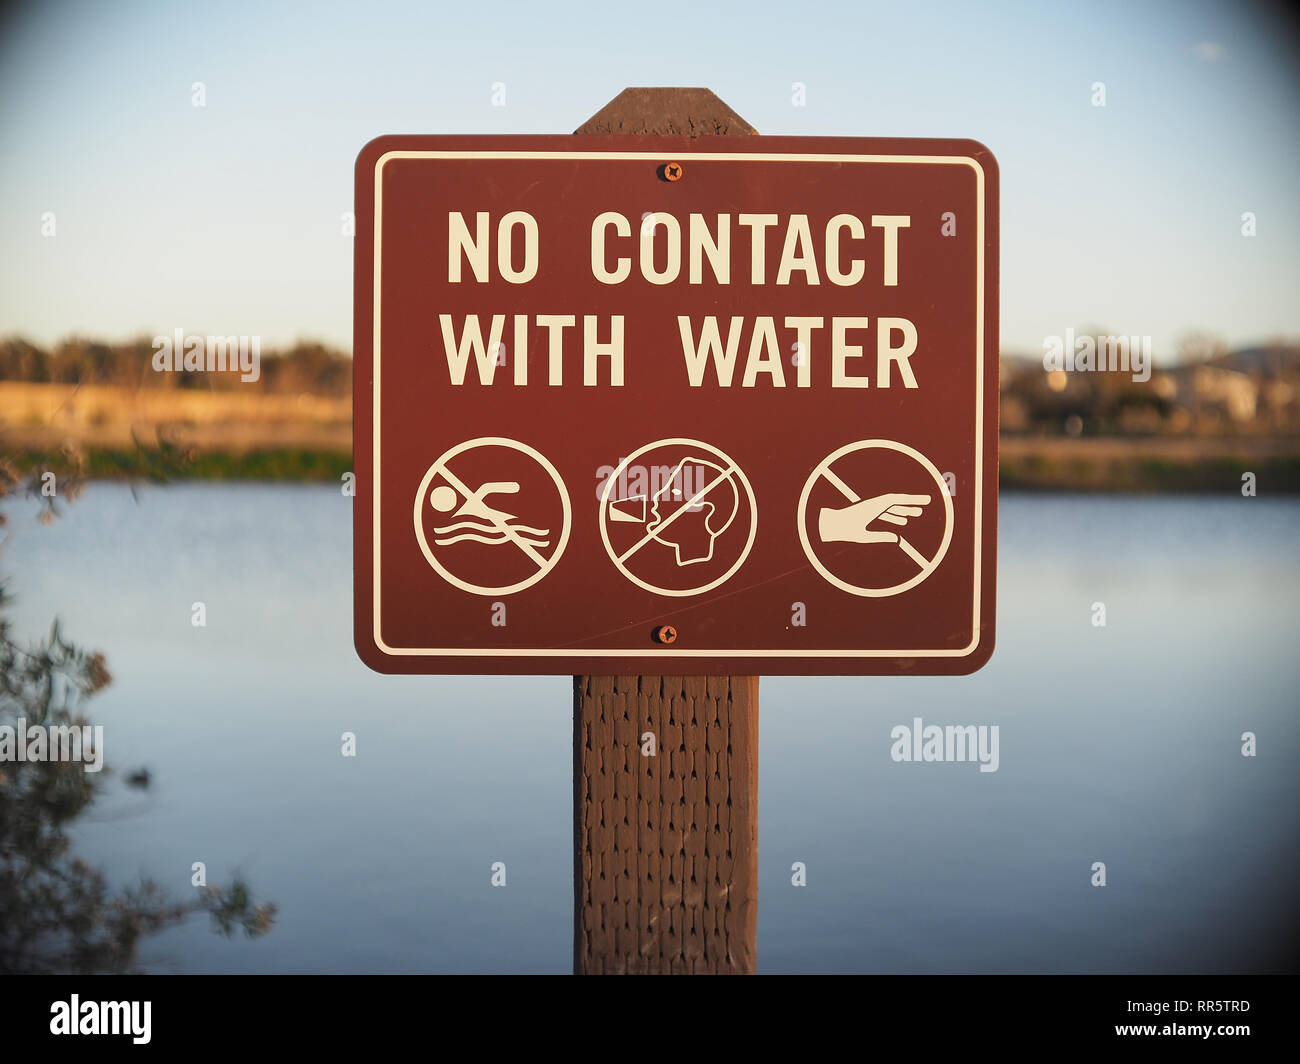 'No contact with water' sign Stock Photo